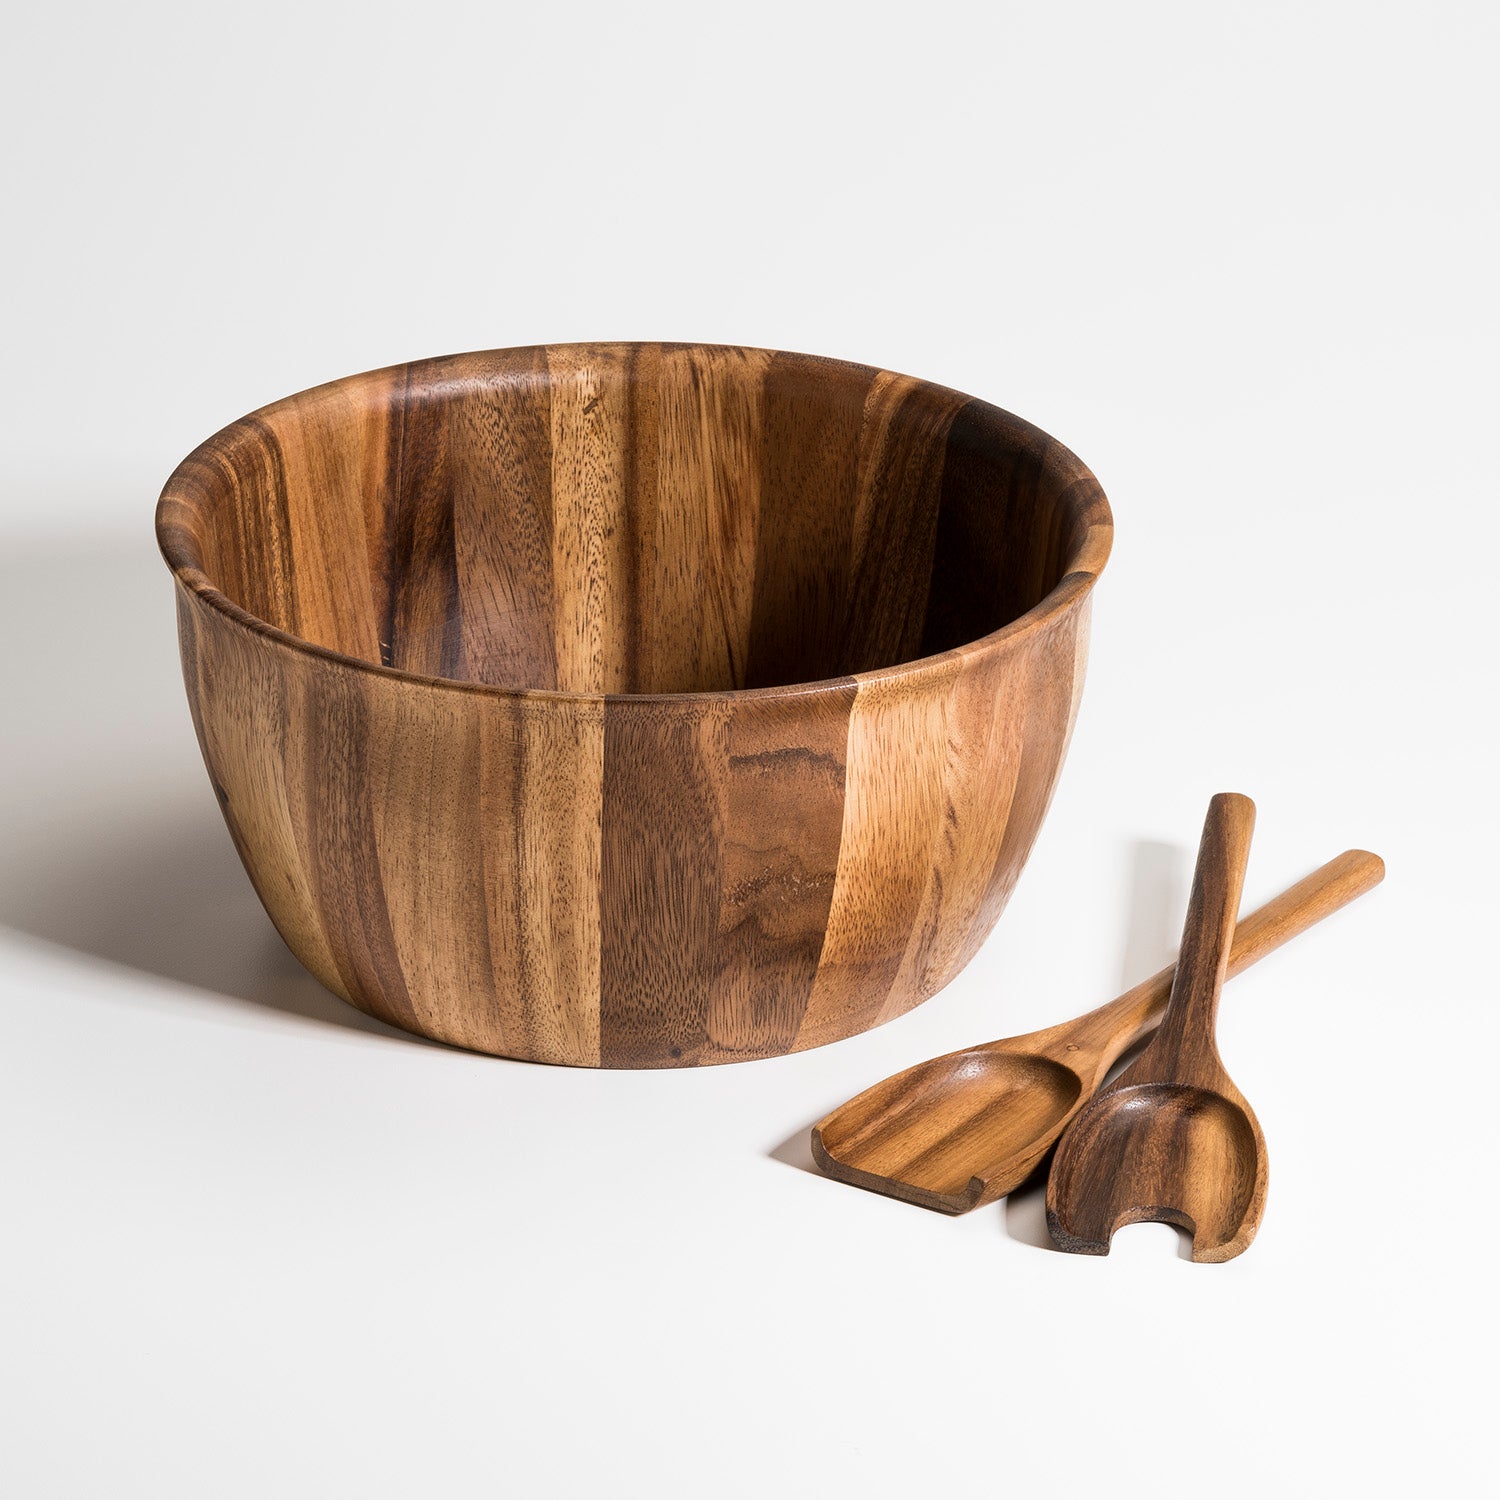 X-Large Salad Bowl with Servers - Mercantile Mountain